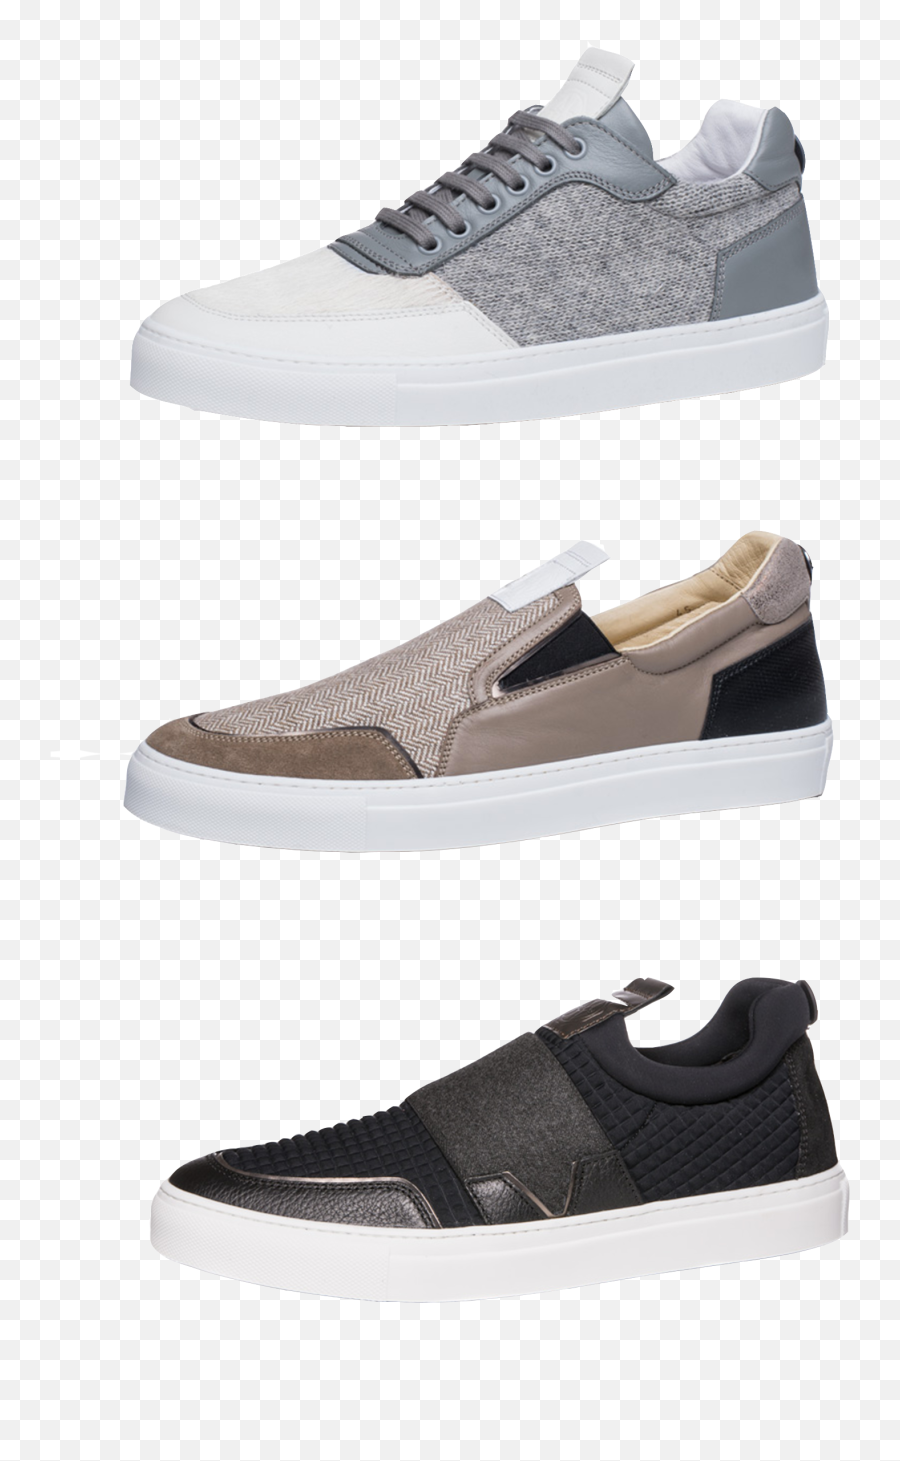 Mariano Di Vaio Outfit - Shoes For Men Png Style Emoji,Emoji Outfit For Men